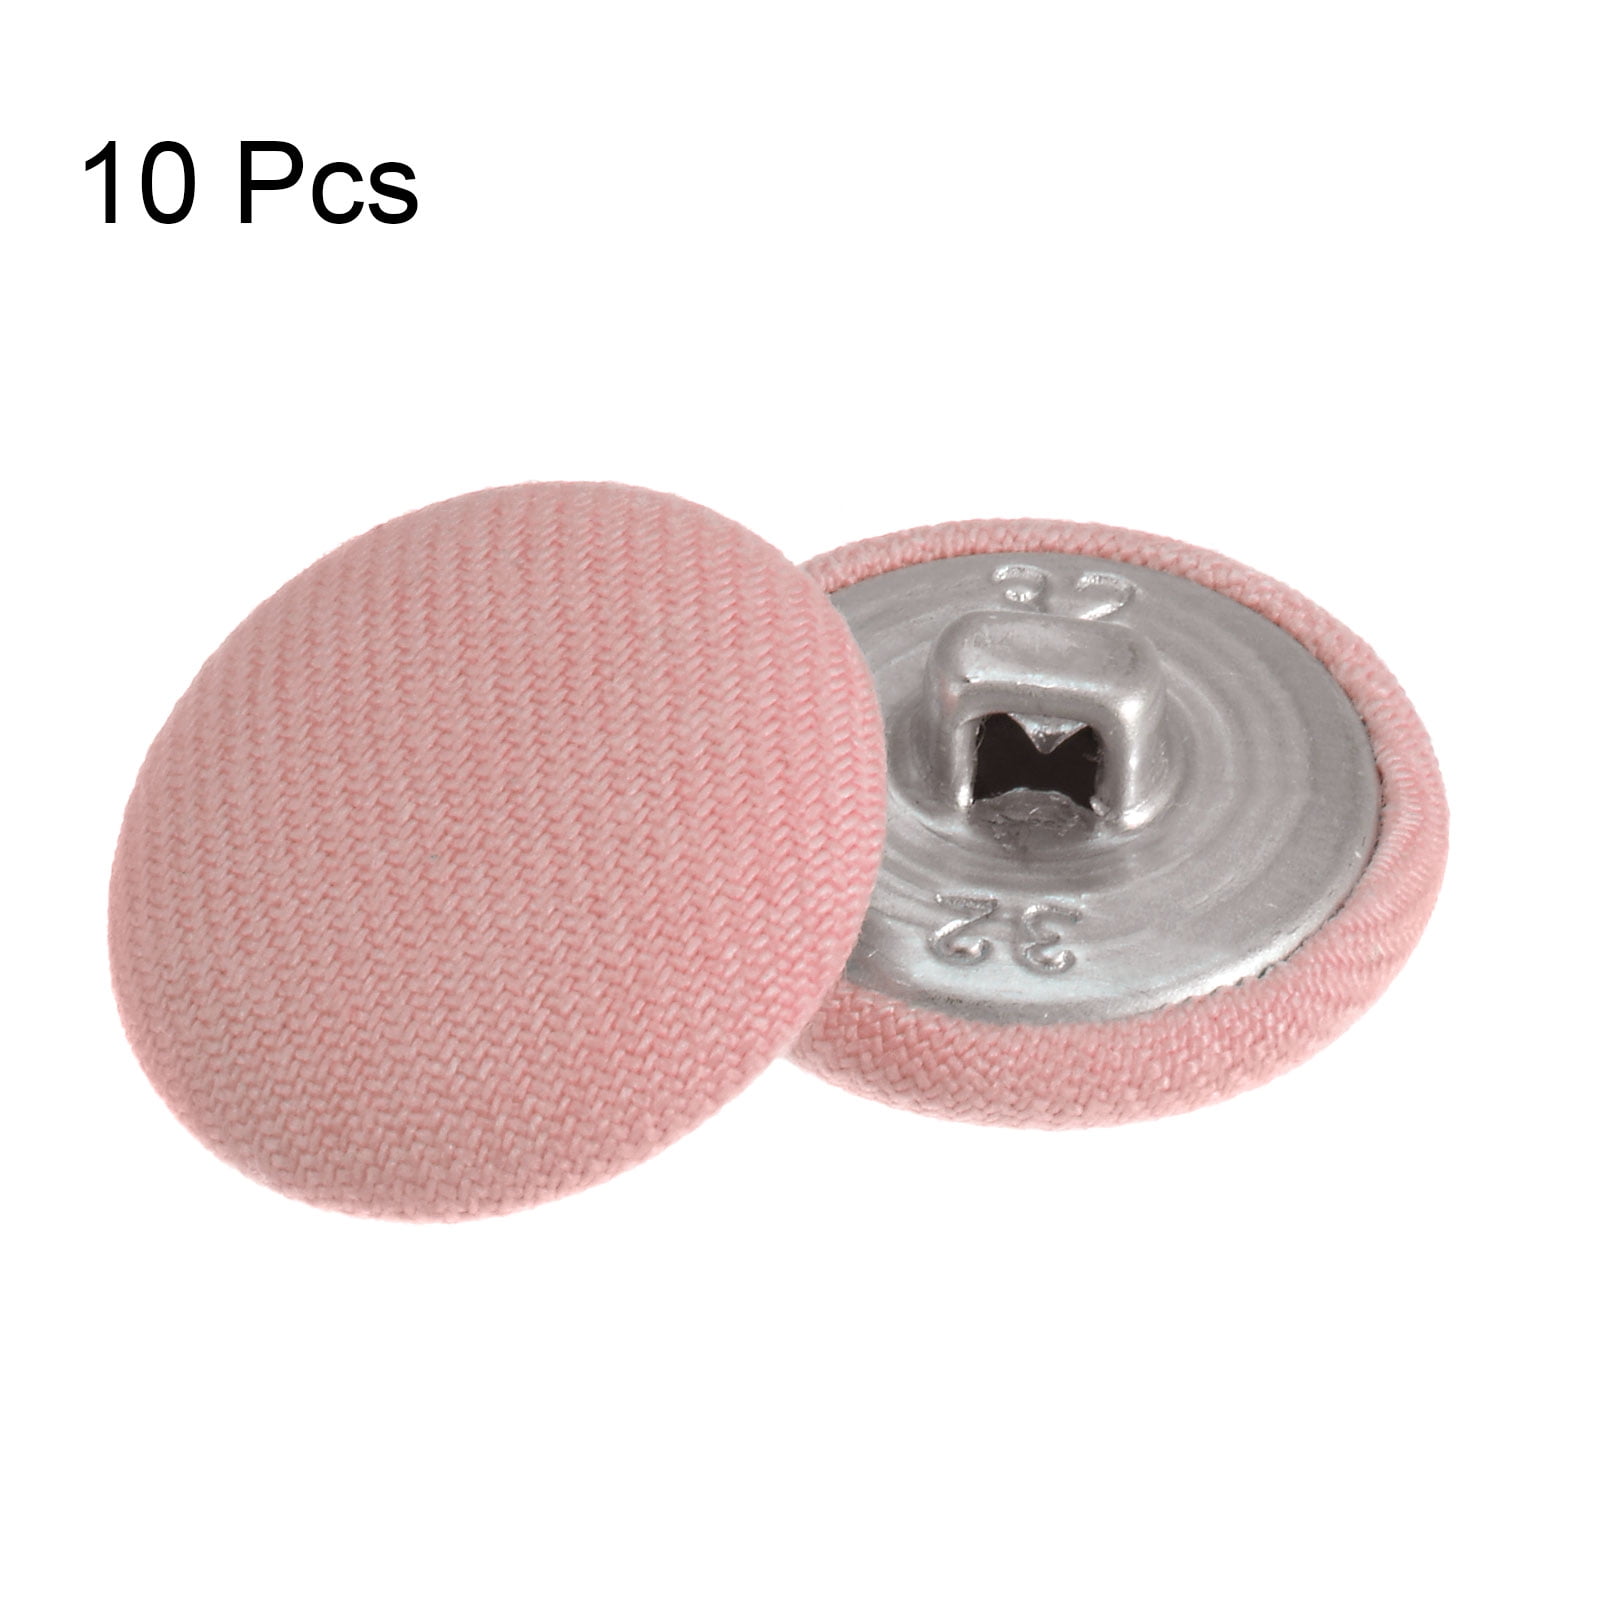 PU Fabric Cover Button Fake Leather Covered Metal Shank Button for